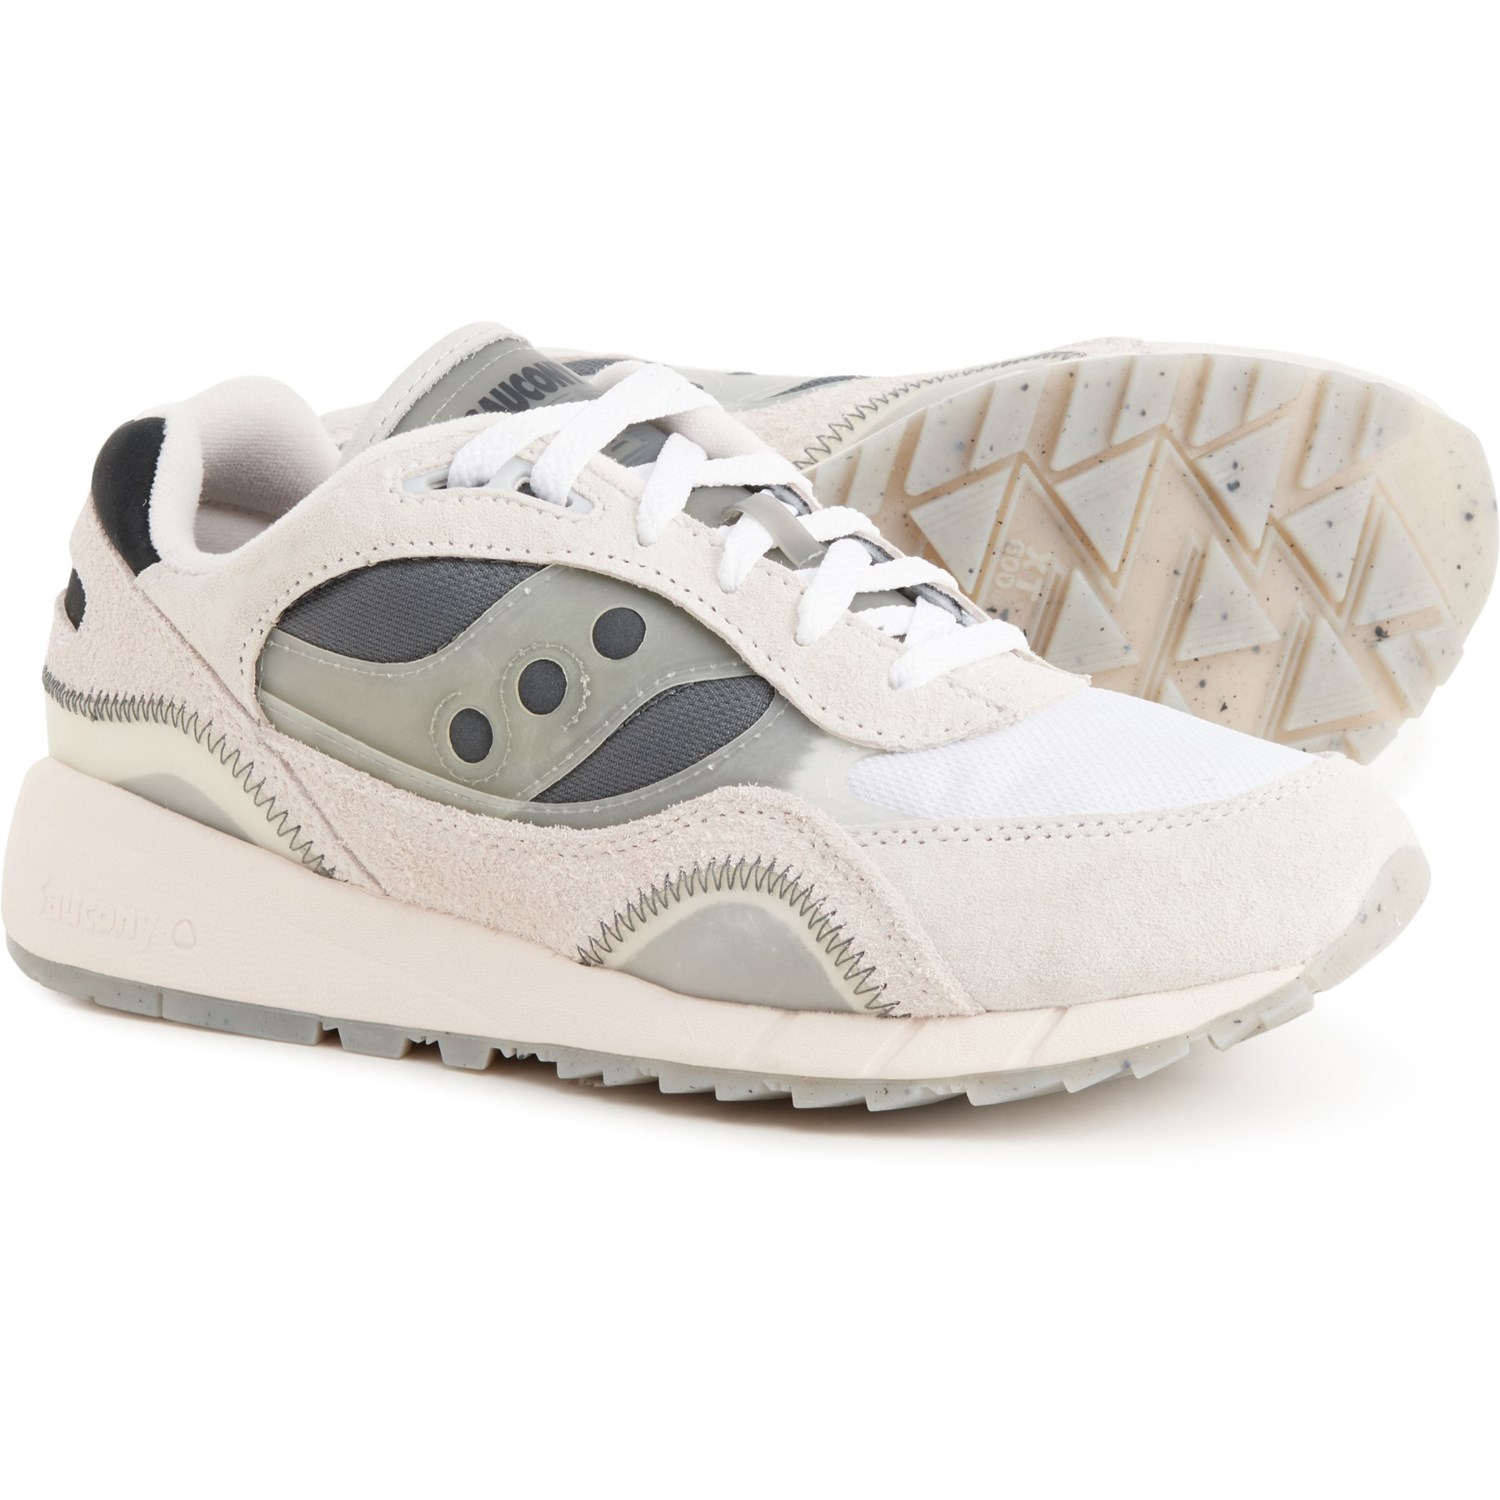 Saucony Fashion Running Shoes (For Men and Women) - Save 53%